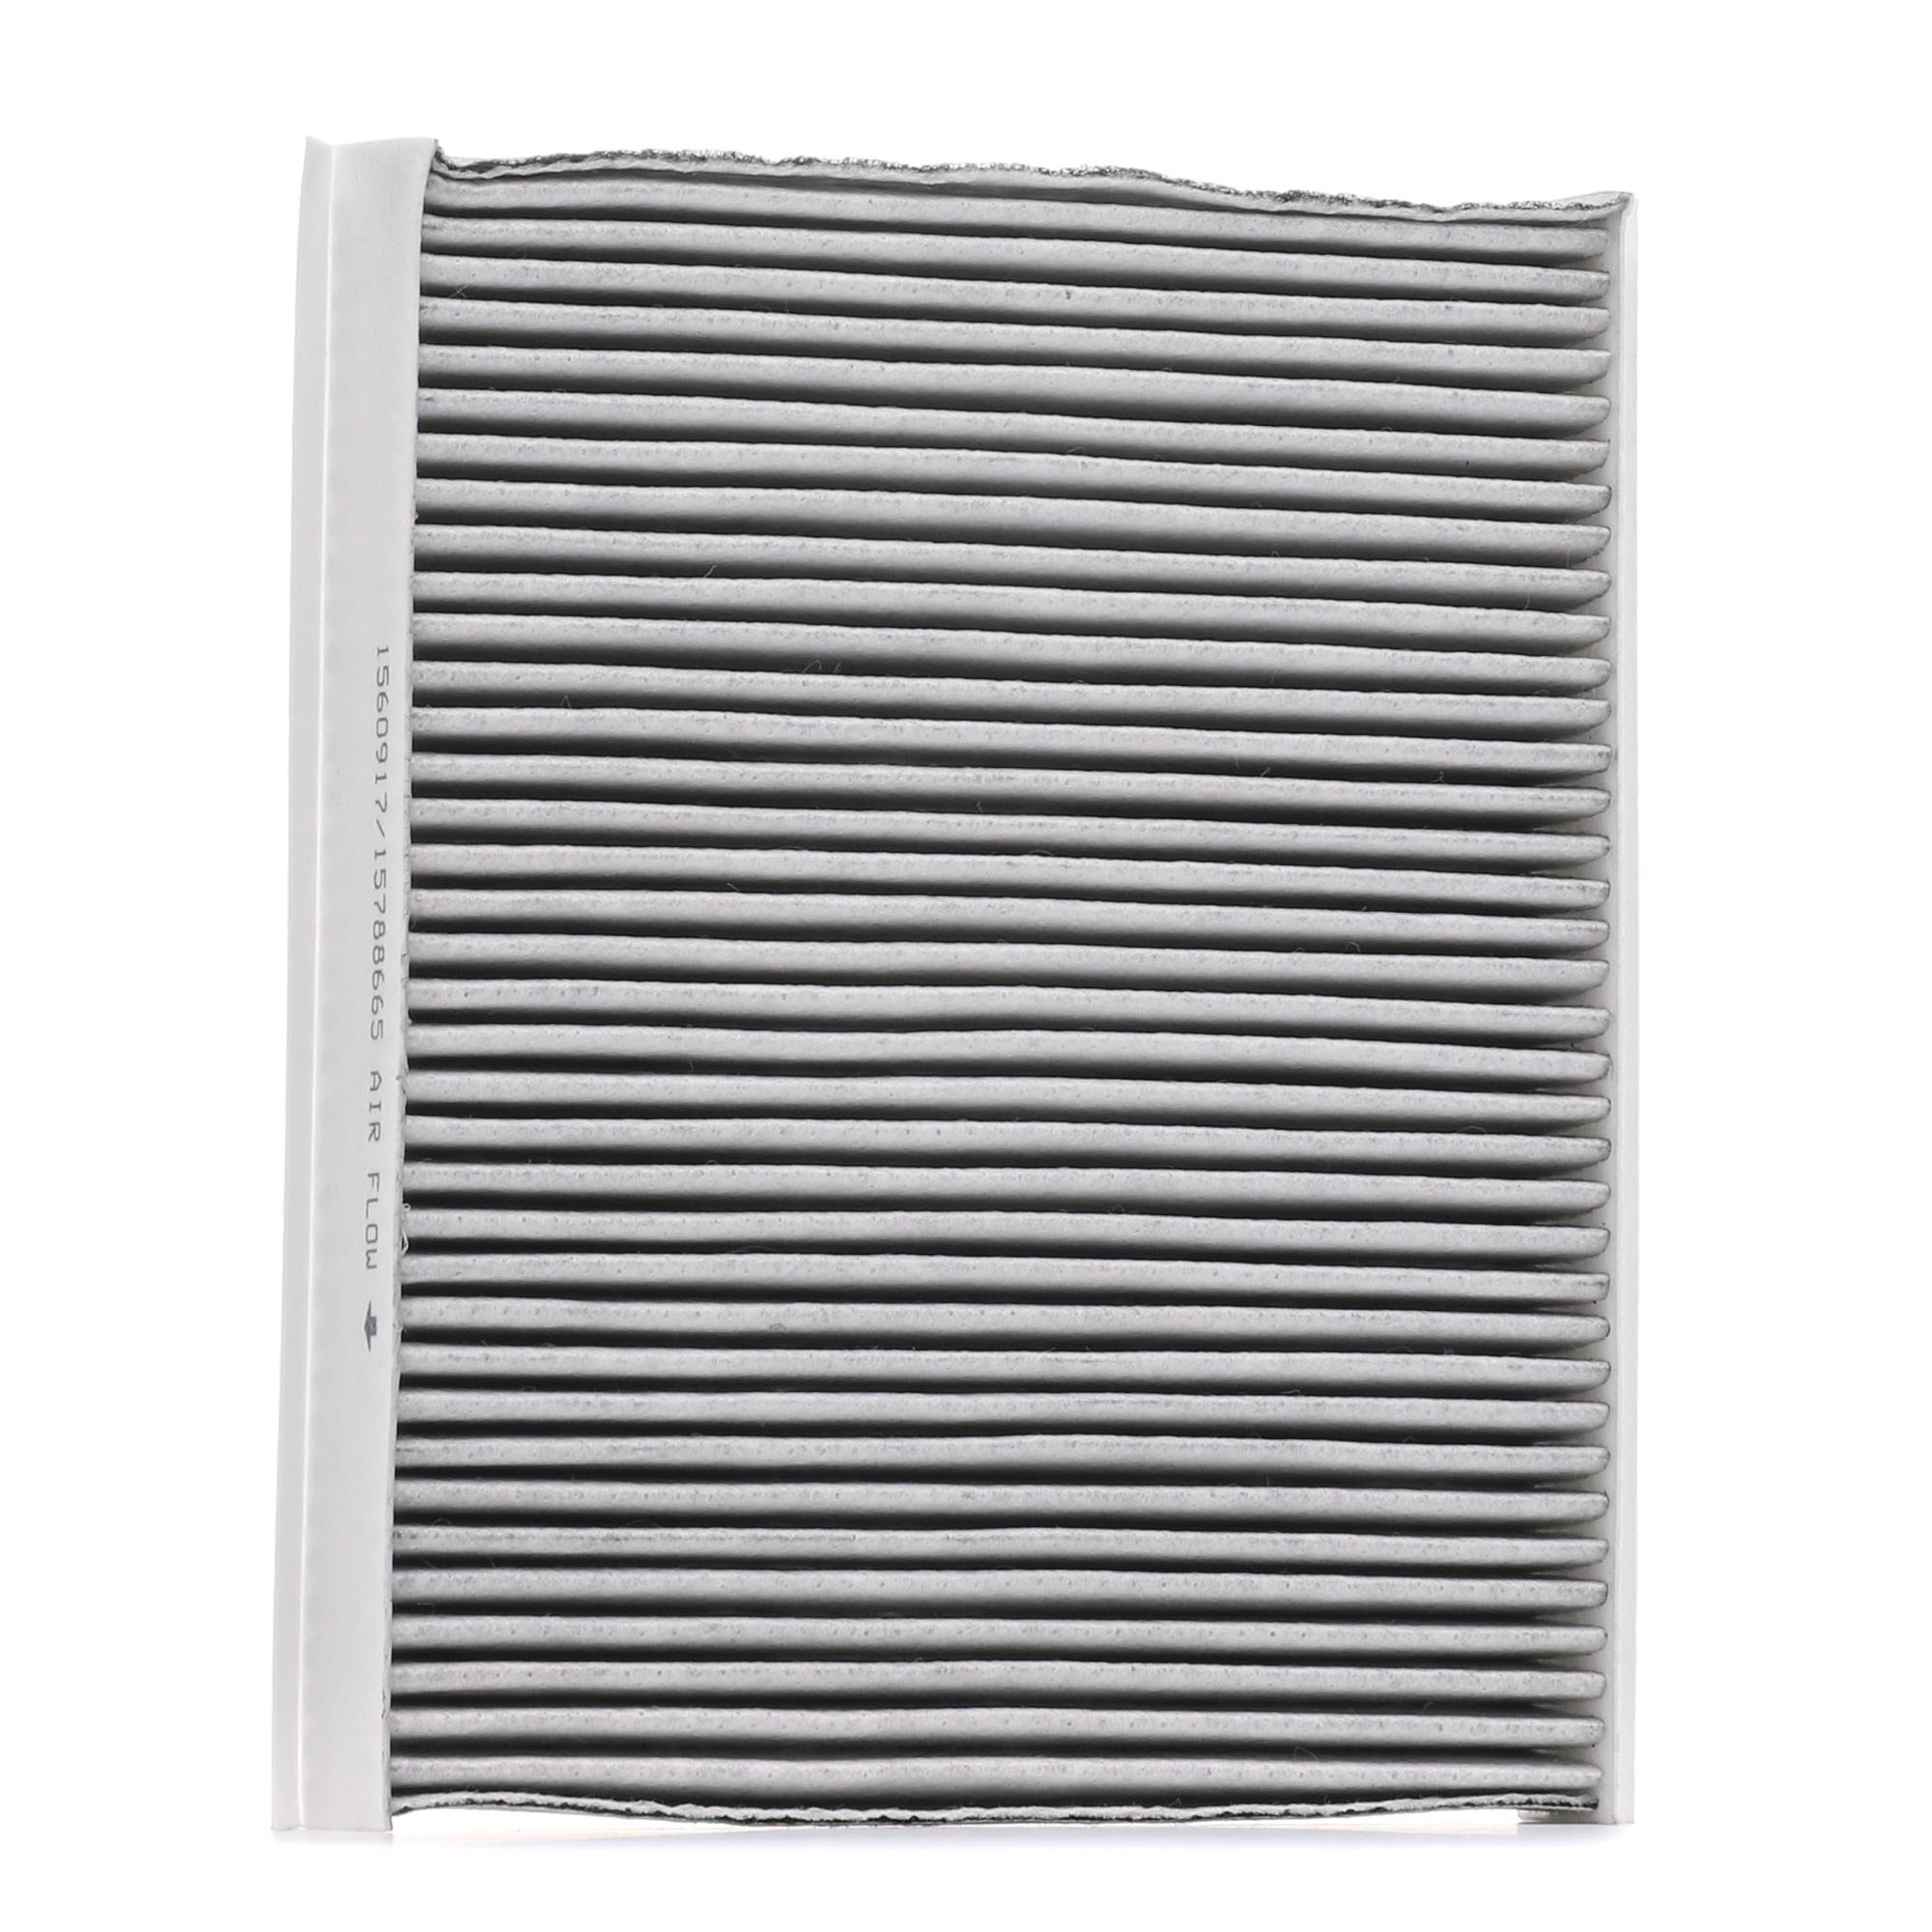 RIDEX 424I0539 Pollen filter Activated Carbon Filter, with Odour Absorbent Effect, 240 mm x 197 mm x 30 mm